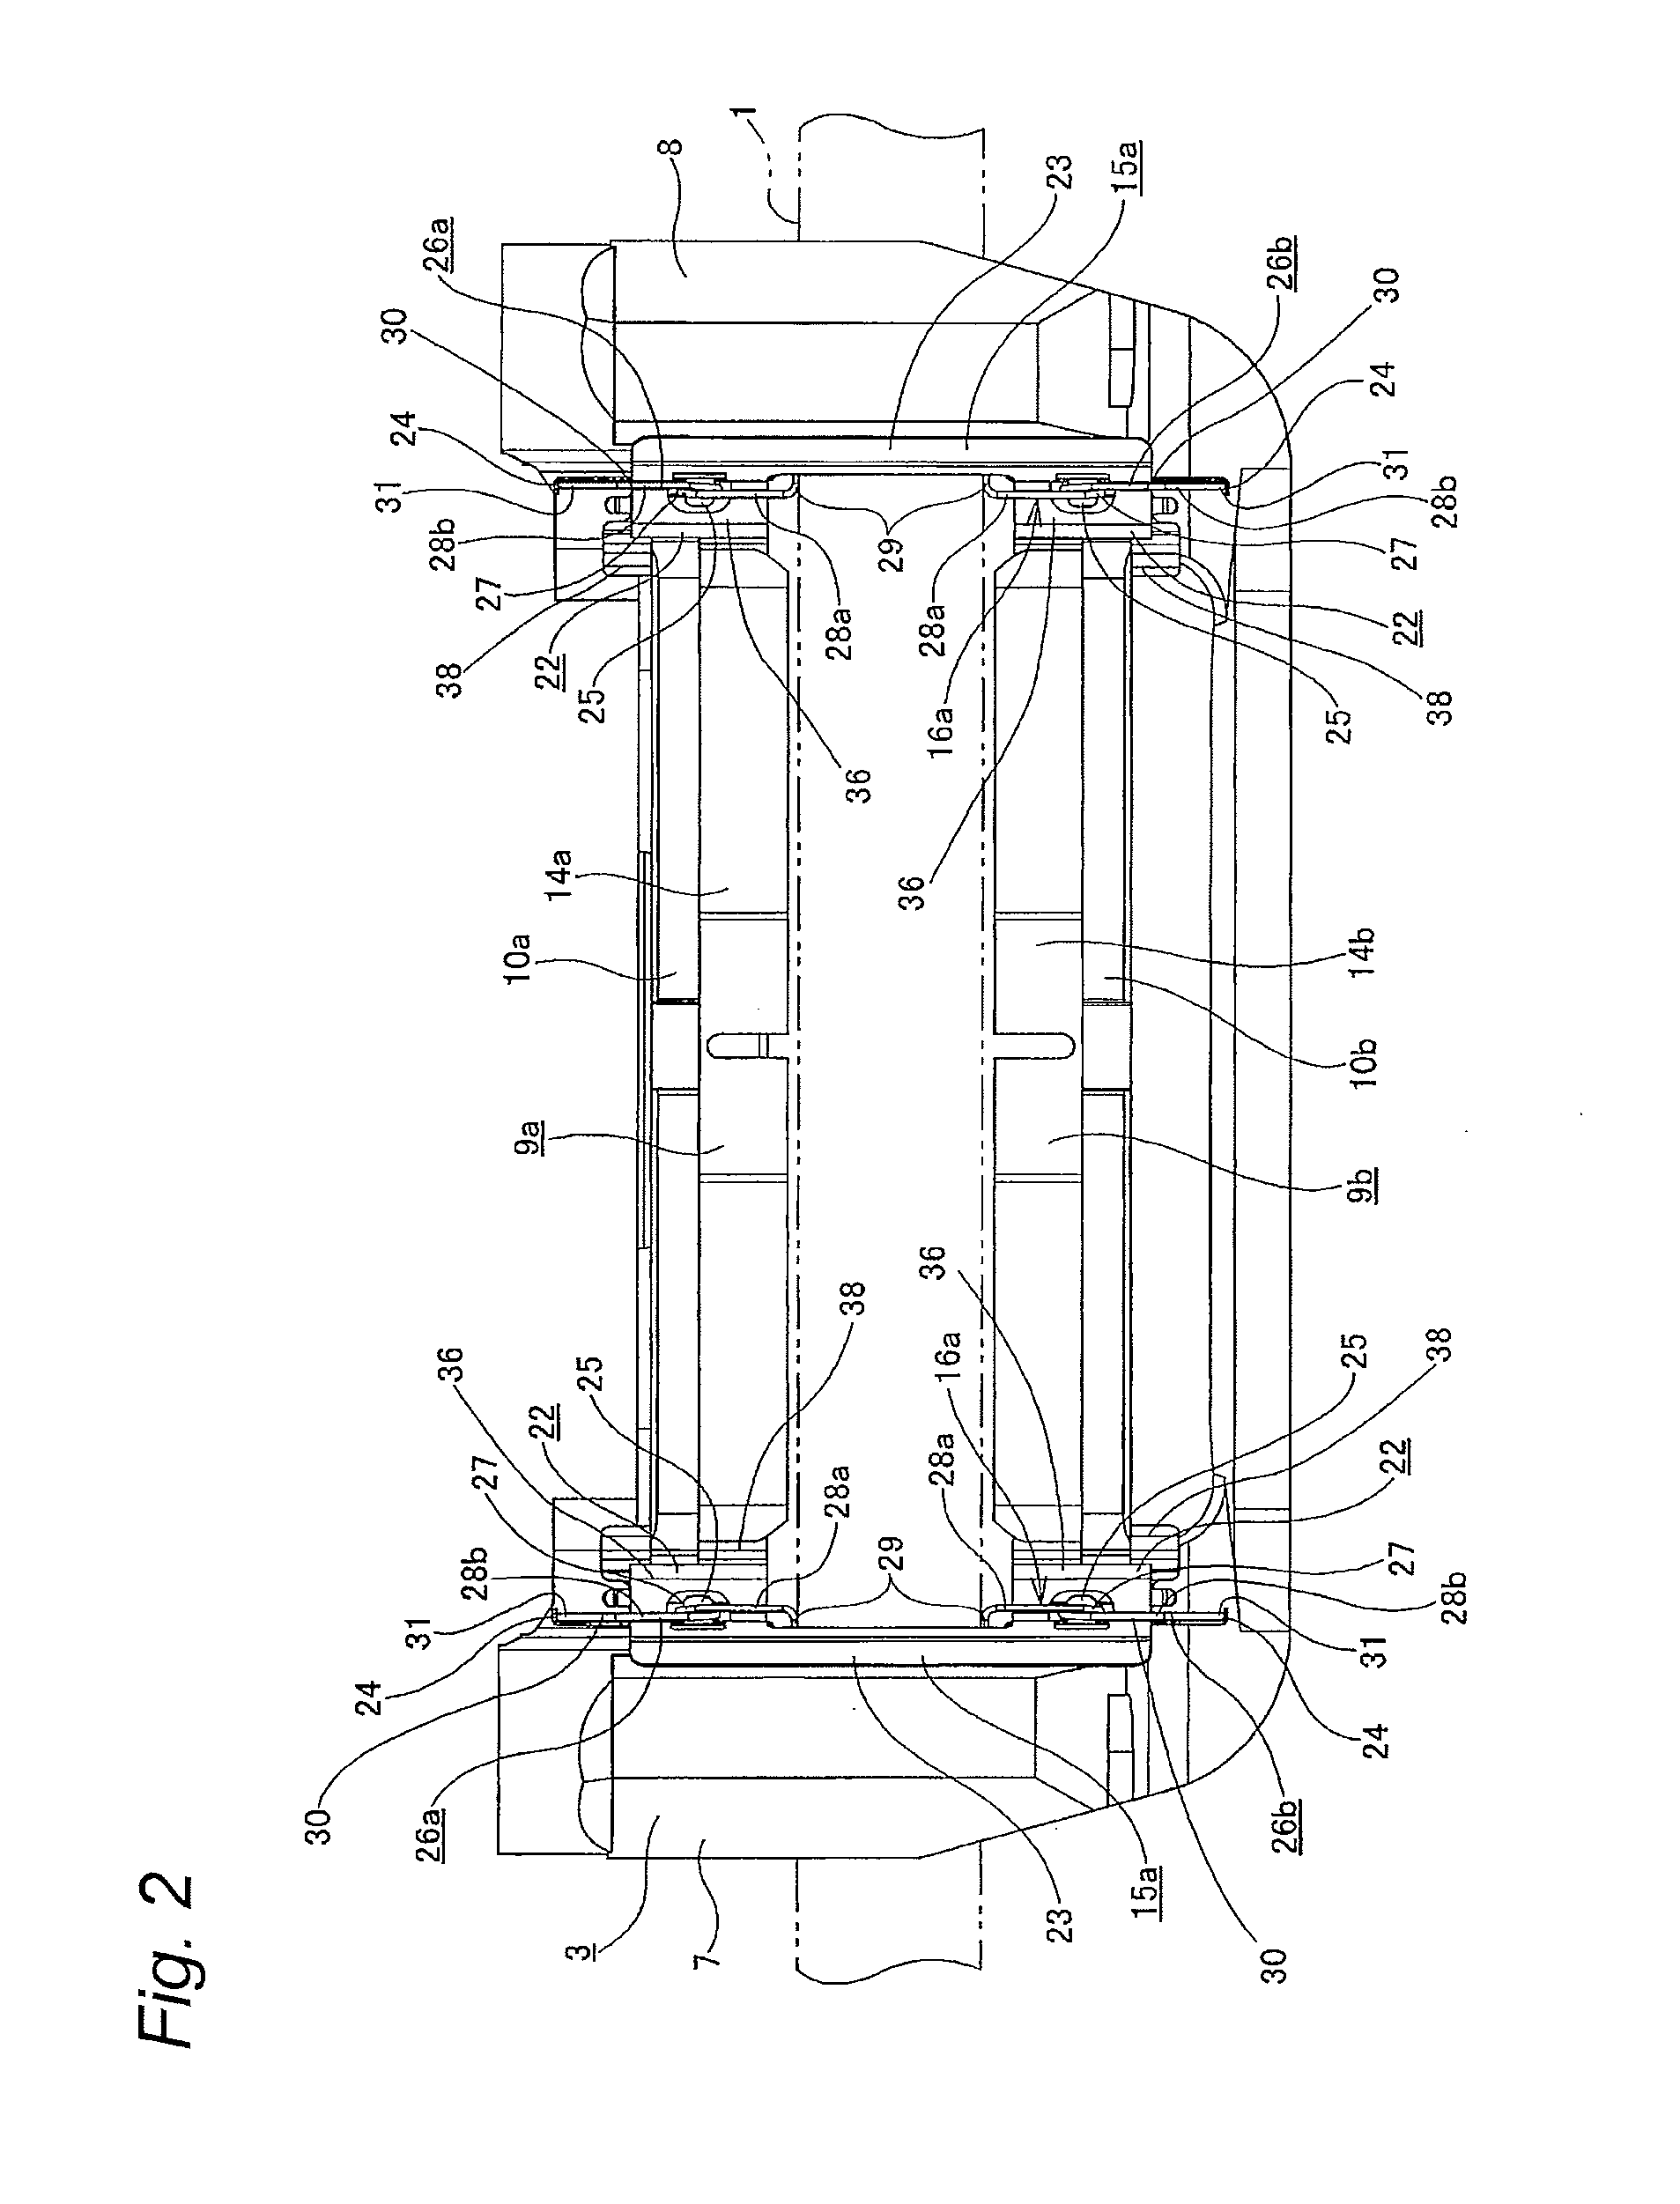 Floating disc brake, method of assembling same, and assemblies consisting of pad clips and return springs